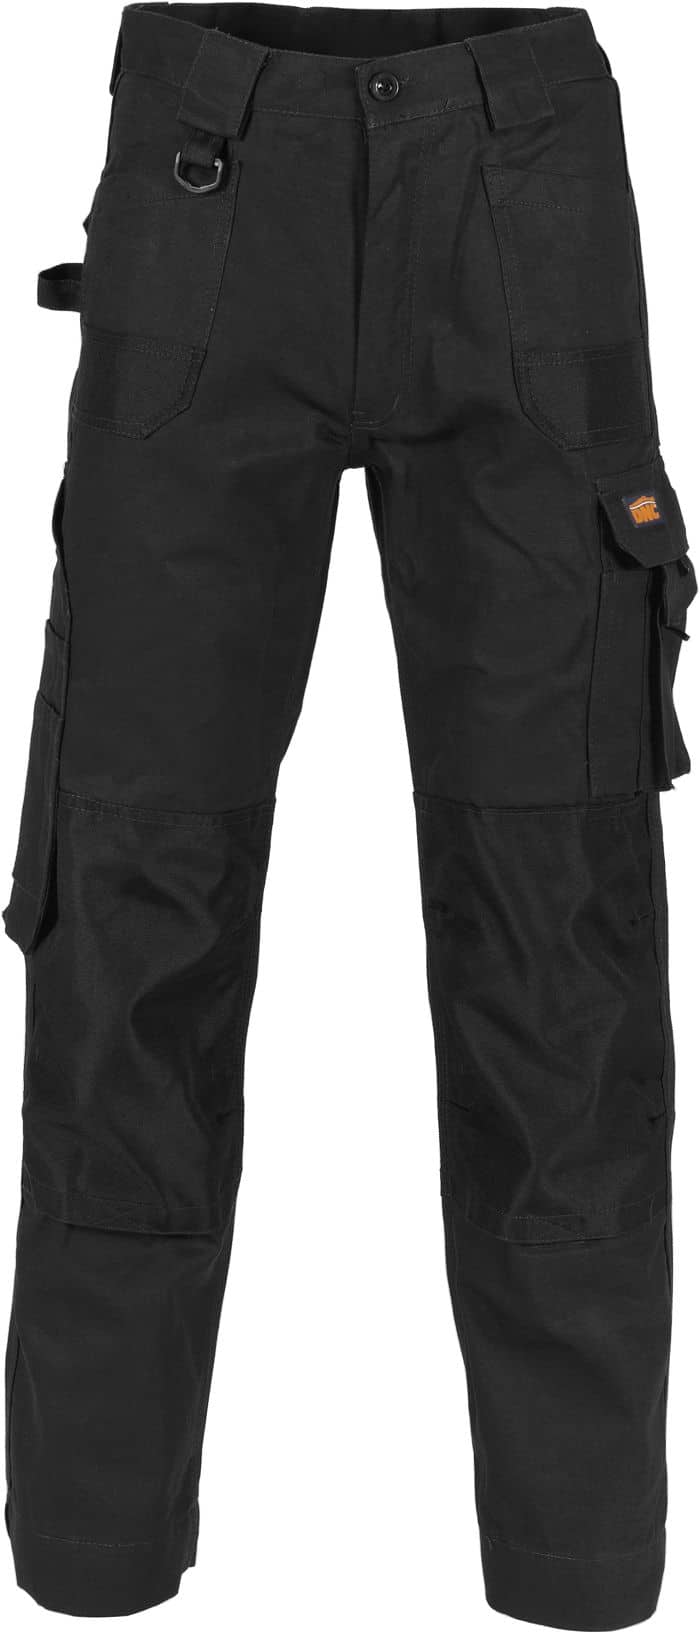 Mens Duratex Cotton Canvas Cargo Pants (knee pads not included). 100% ...